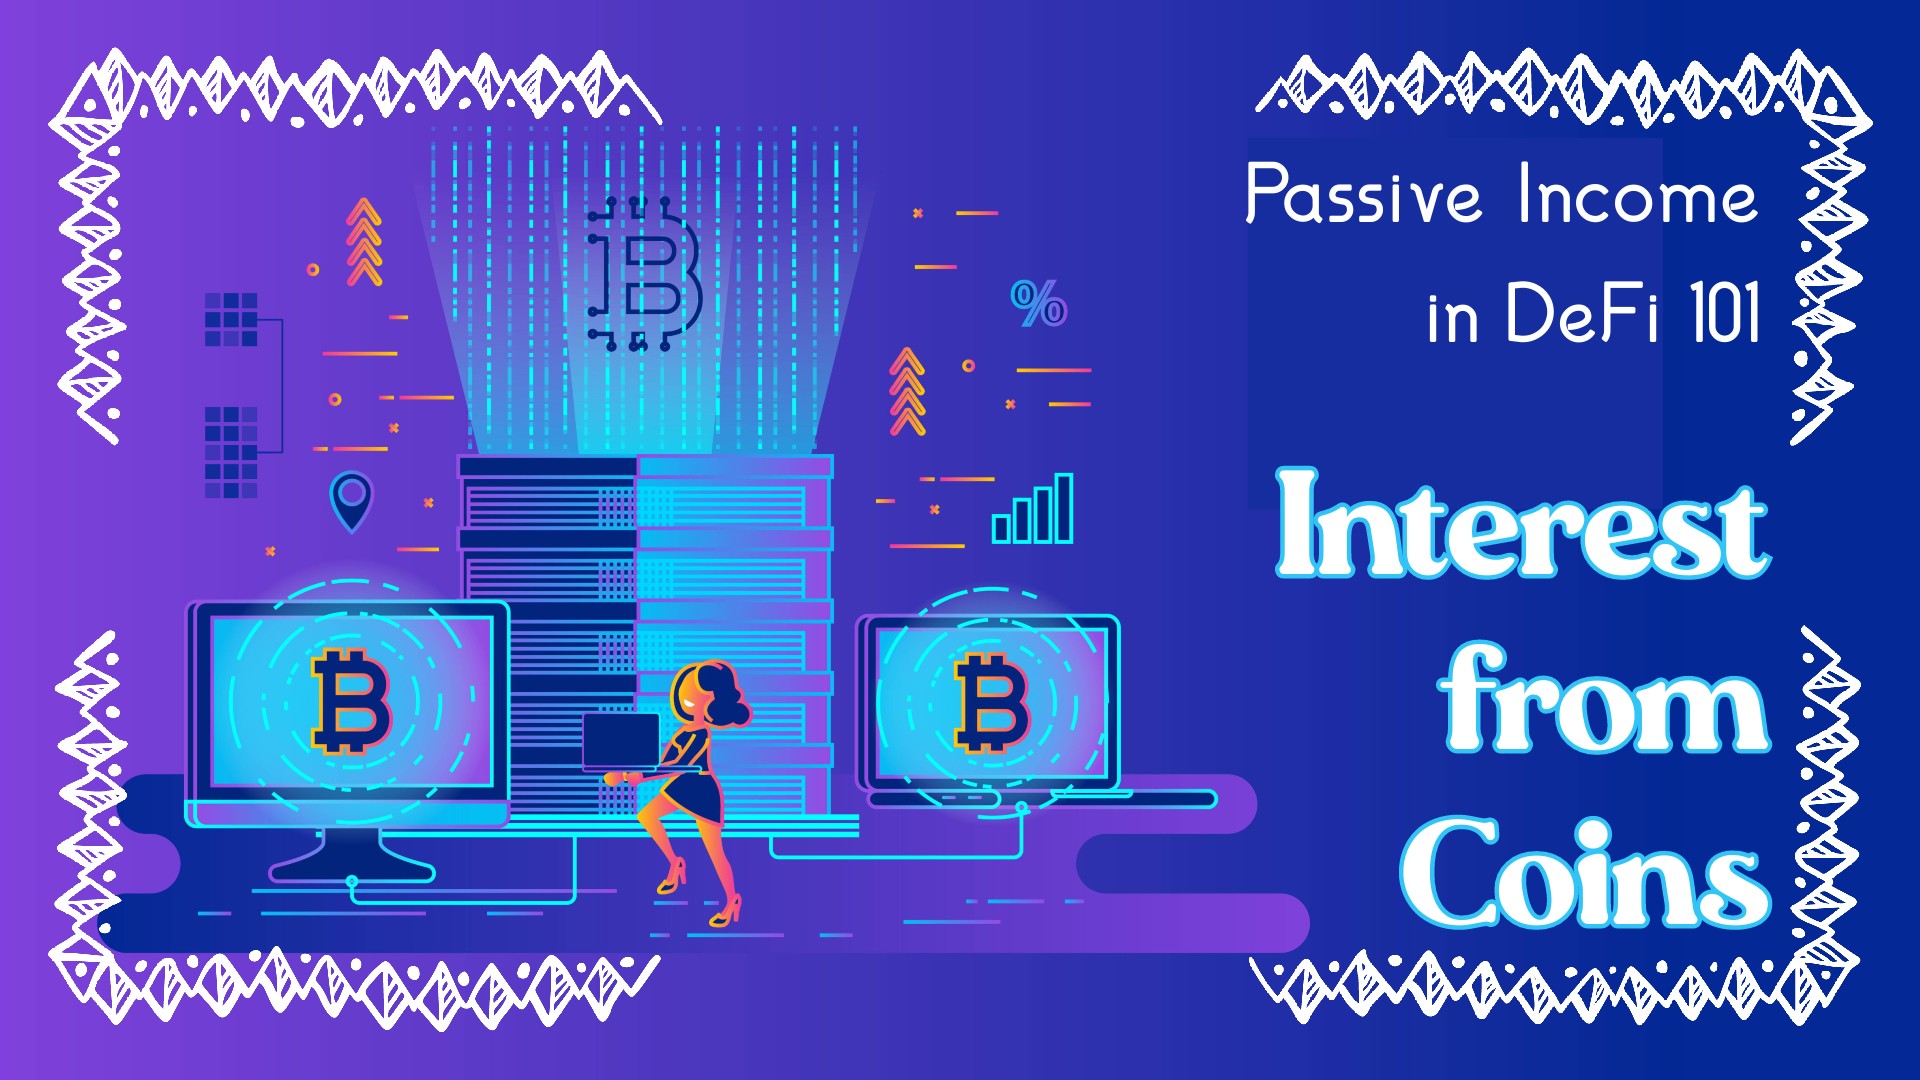 Passive Income in DeFi 101: Interest from Coins